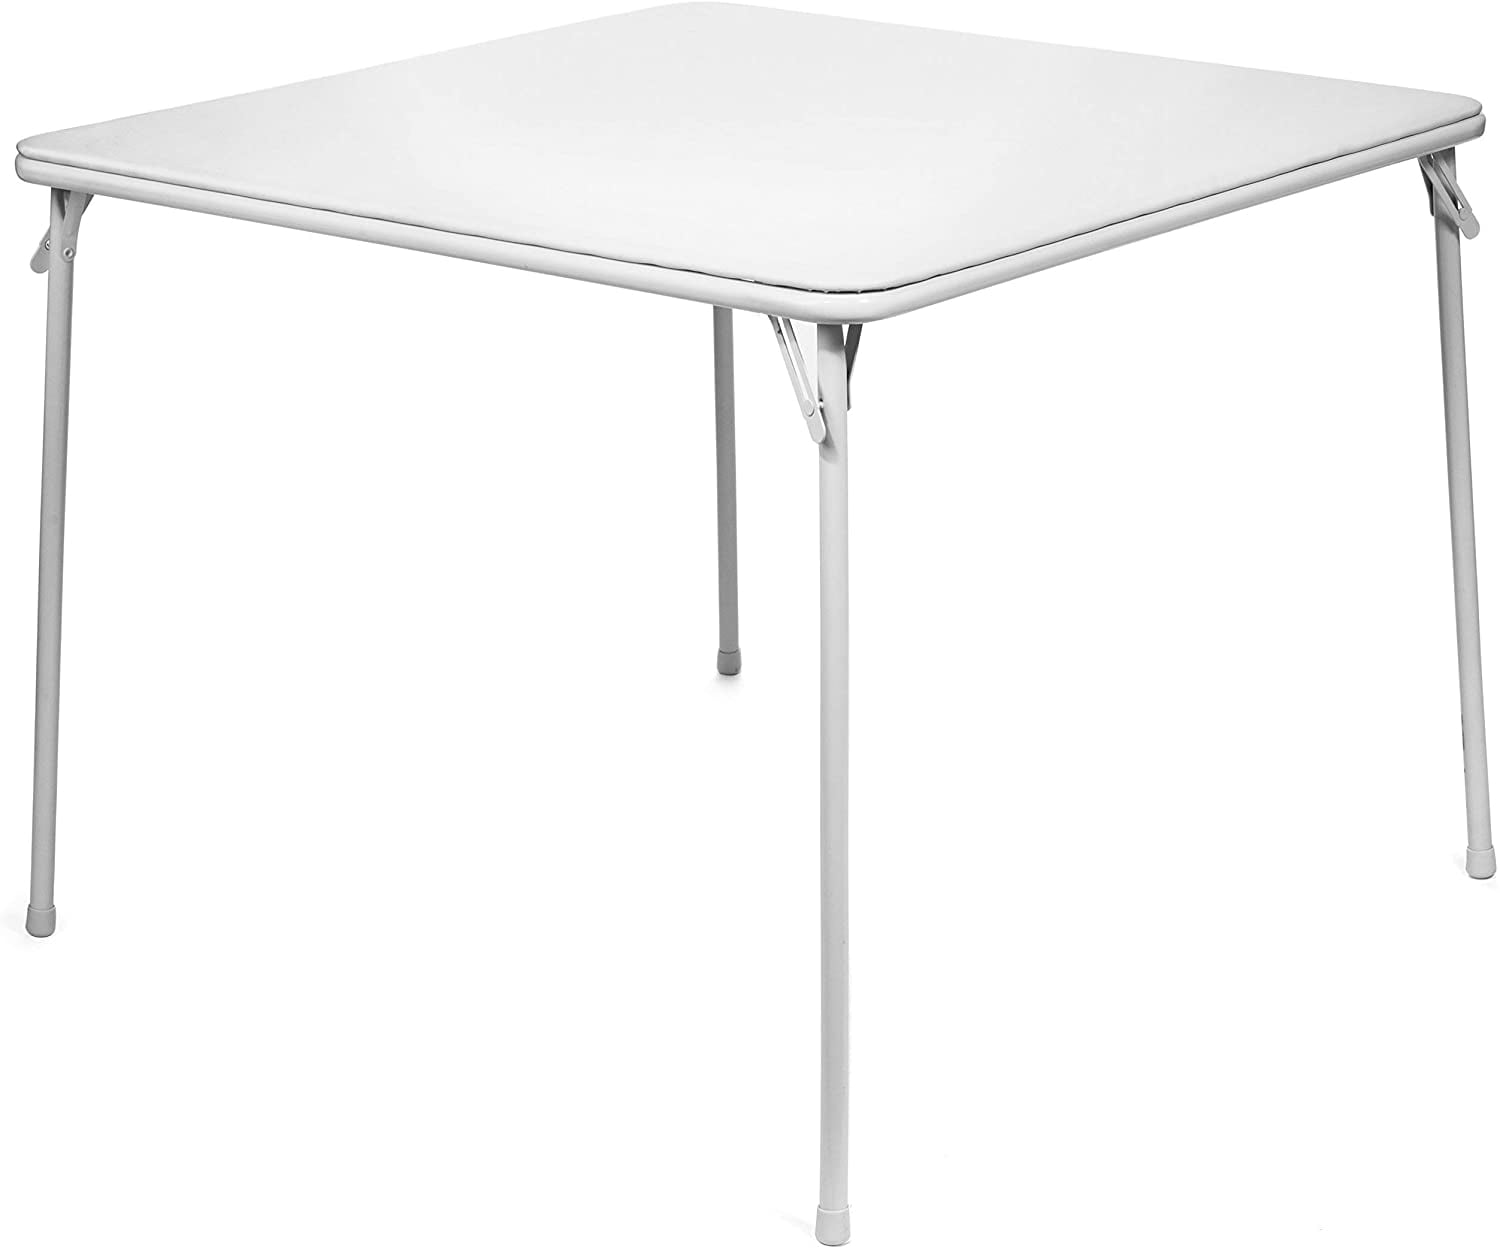 attack Saturate Run XL Series Square Folding Card Table (38") - Easy-to-Use Collapsible Legs  for Portability and Storage - Vinyl Upholstery for Convenient Cleaning -  Steel Construction, Wheelchair Accessible (White) - Walmart.com